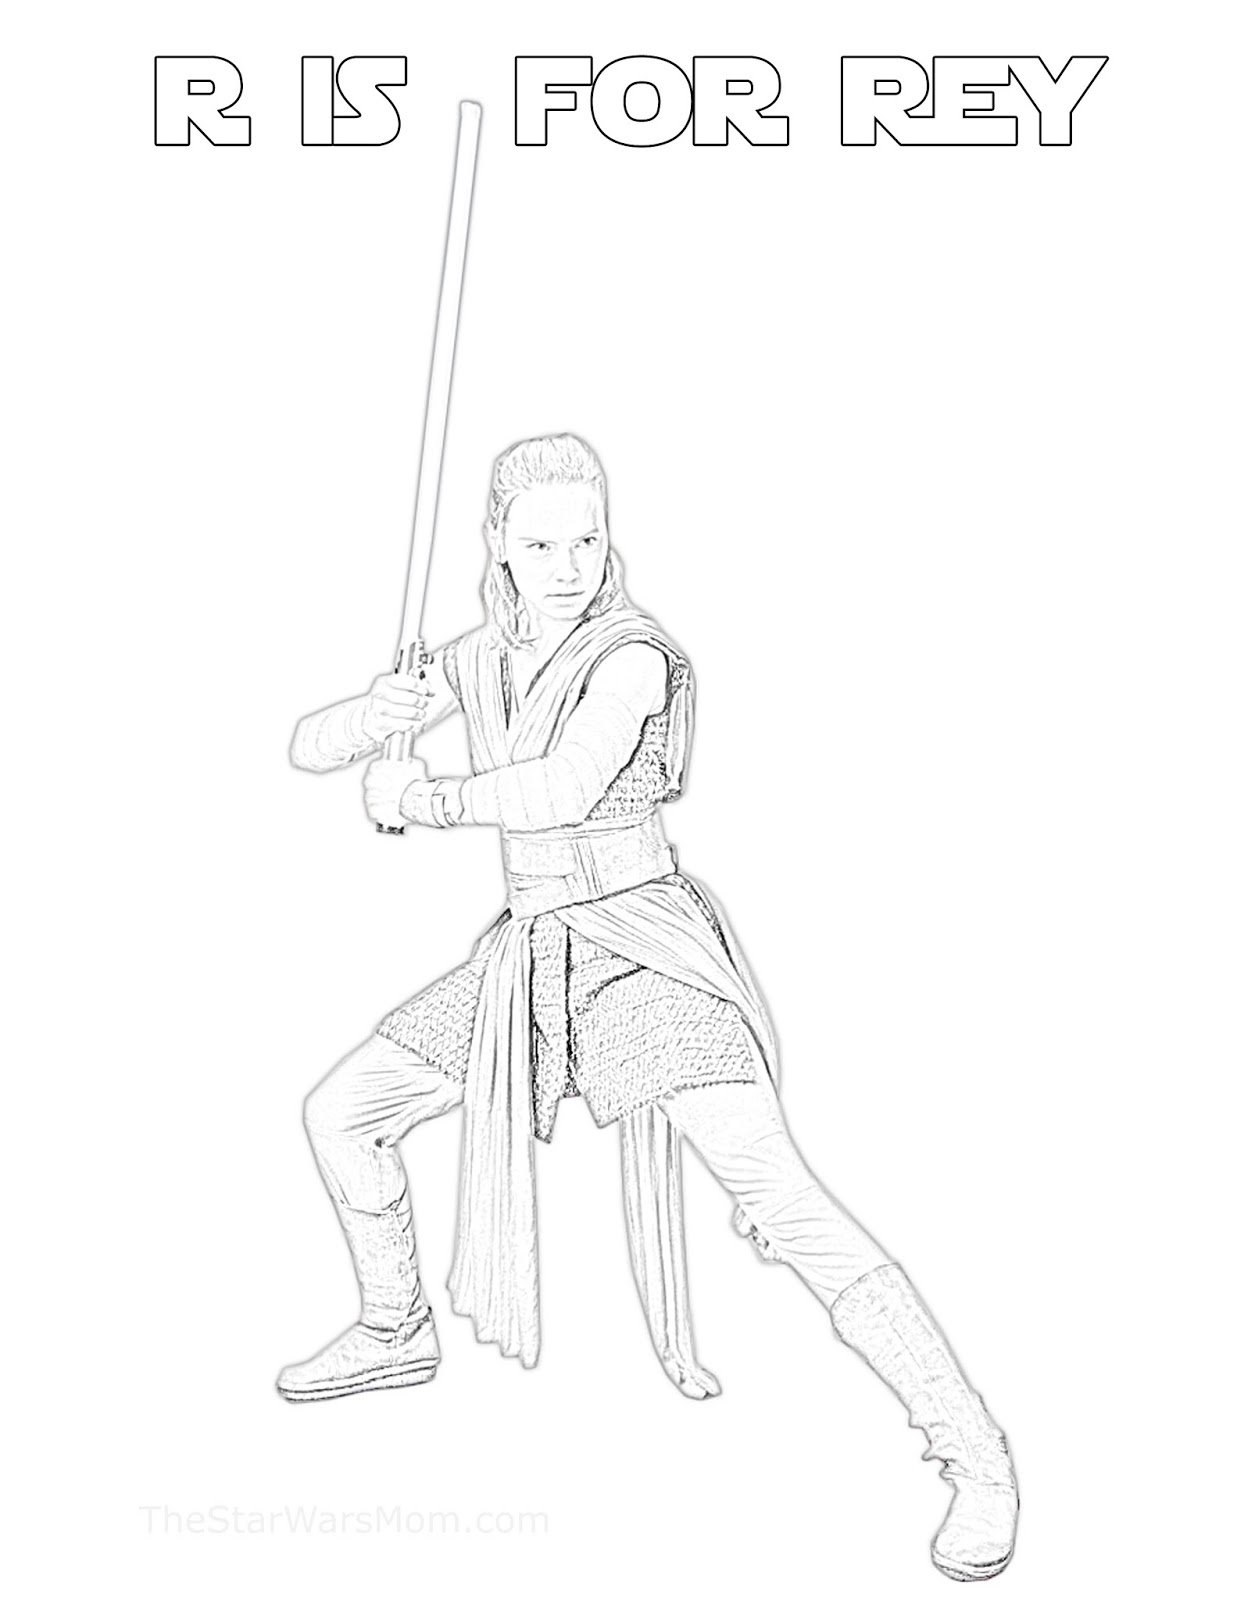 R is for Rey - Star Wars Alphabet Coloring Page - The Star Wars Mom –  Parties, Recipes, Crafts, and Printables